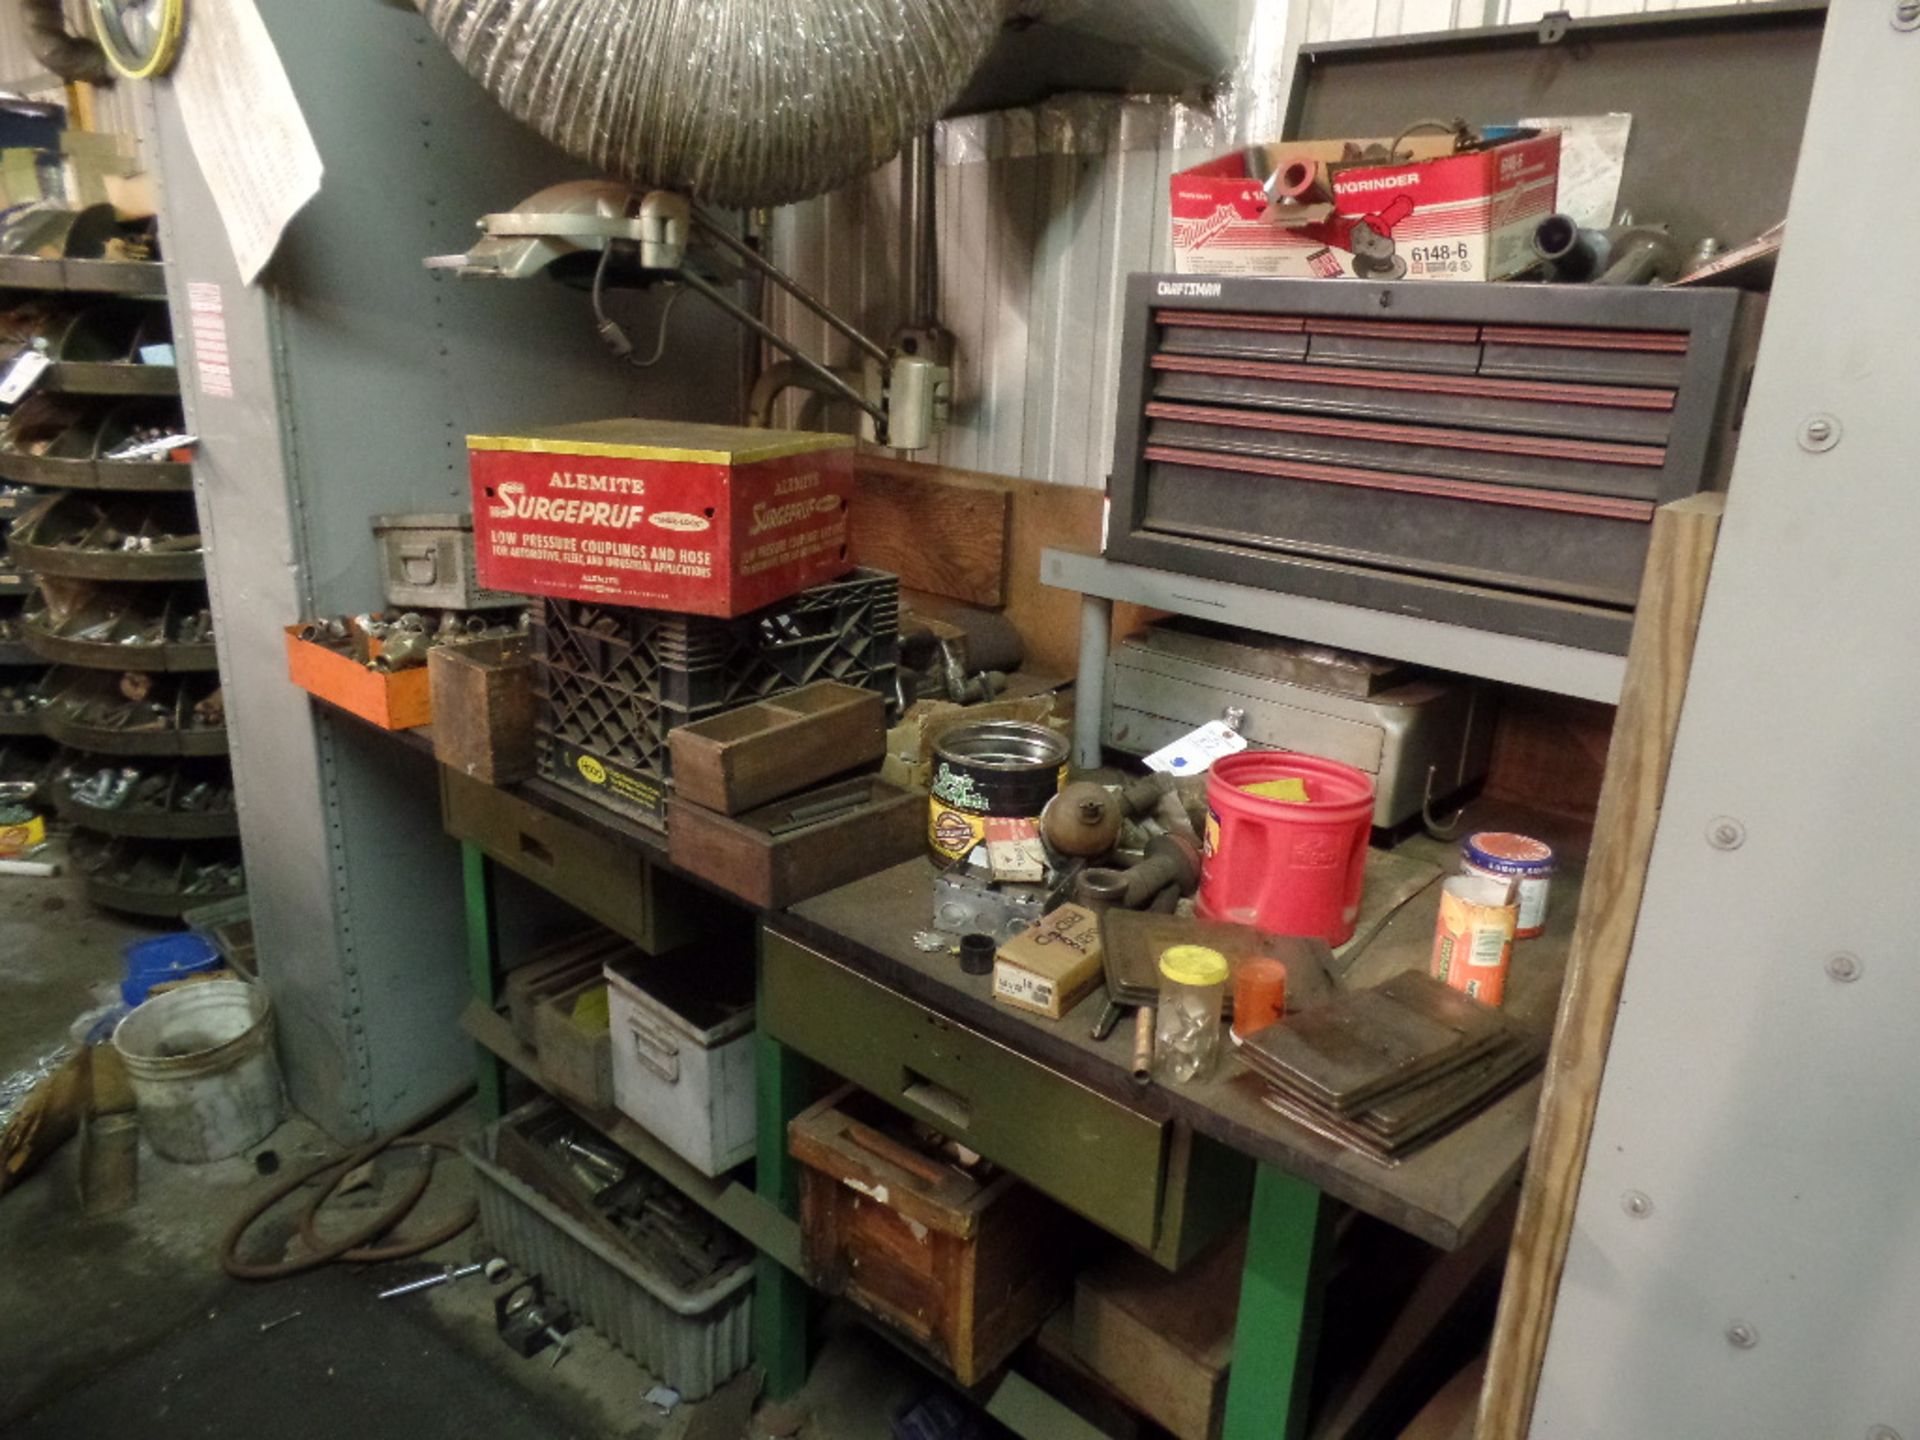 {LOT}Bolts, Nuts, Fittings, Punches, Etc. on Cabinet and Work Bench. Bench Included - Image 2 of 2